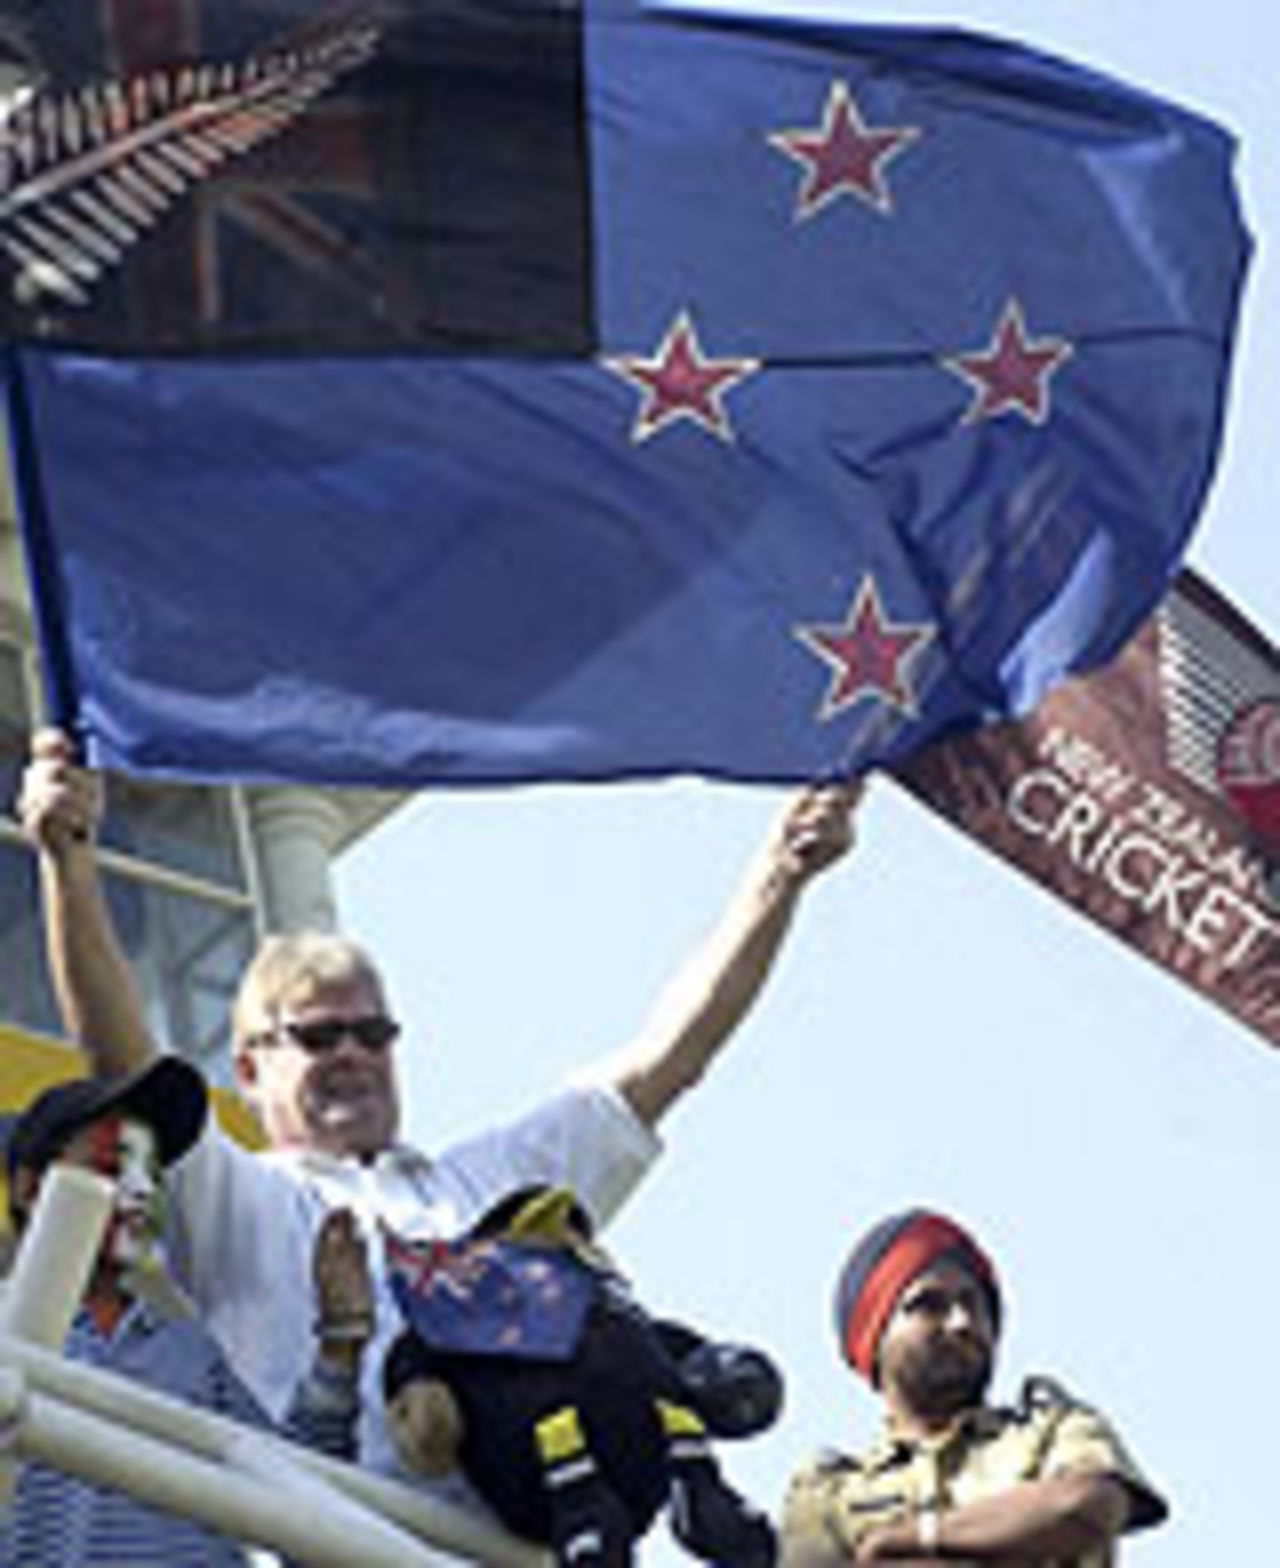 NZ fans cheer their team, India v New Zealand, 5th Day, 2nd Test, Mohali, October 20, 2003